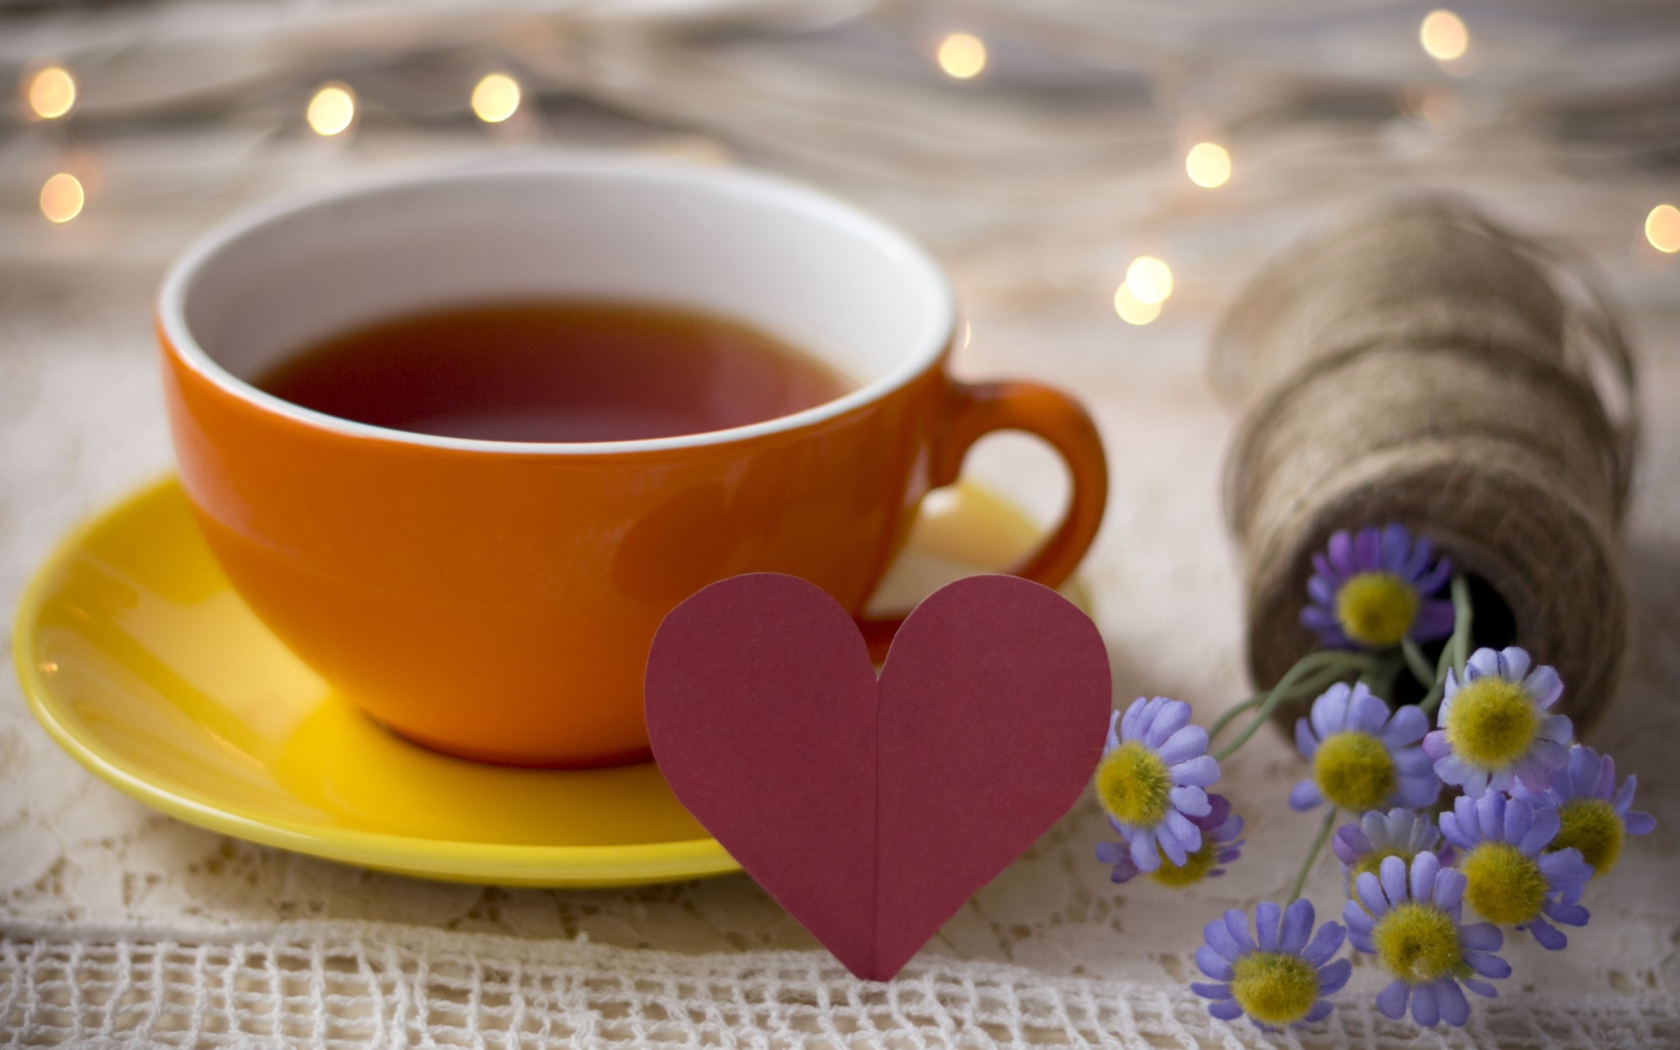 Tea Made With Love wallpaper 1680x1050